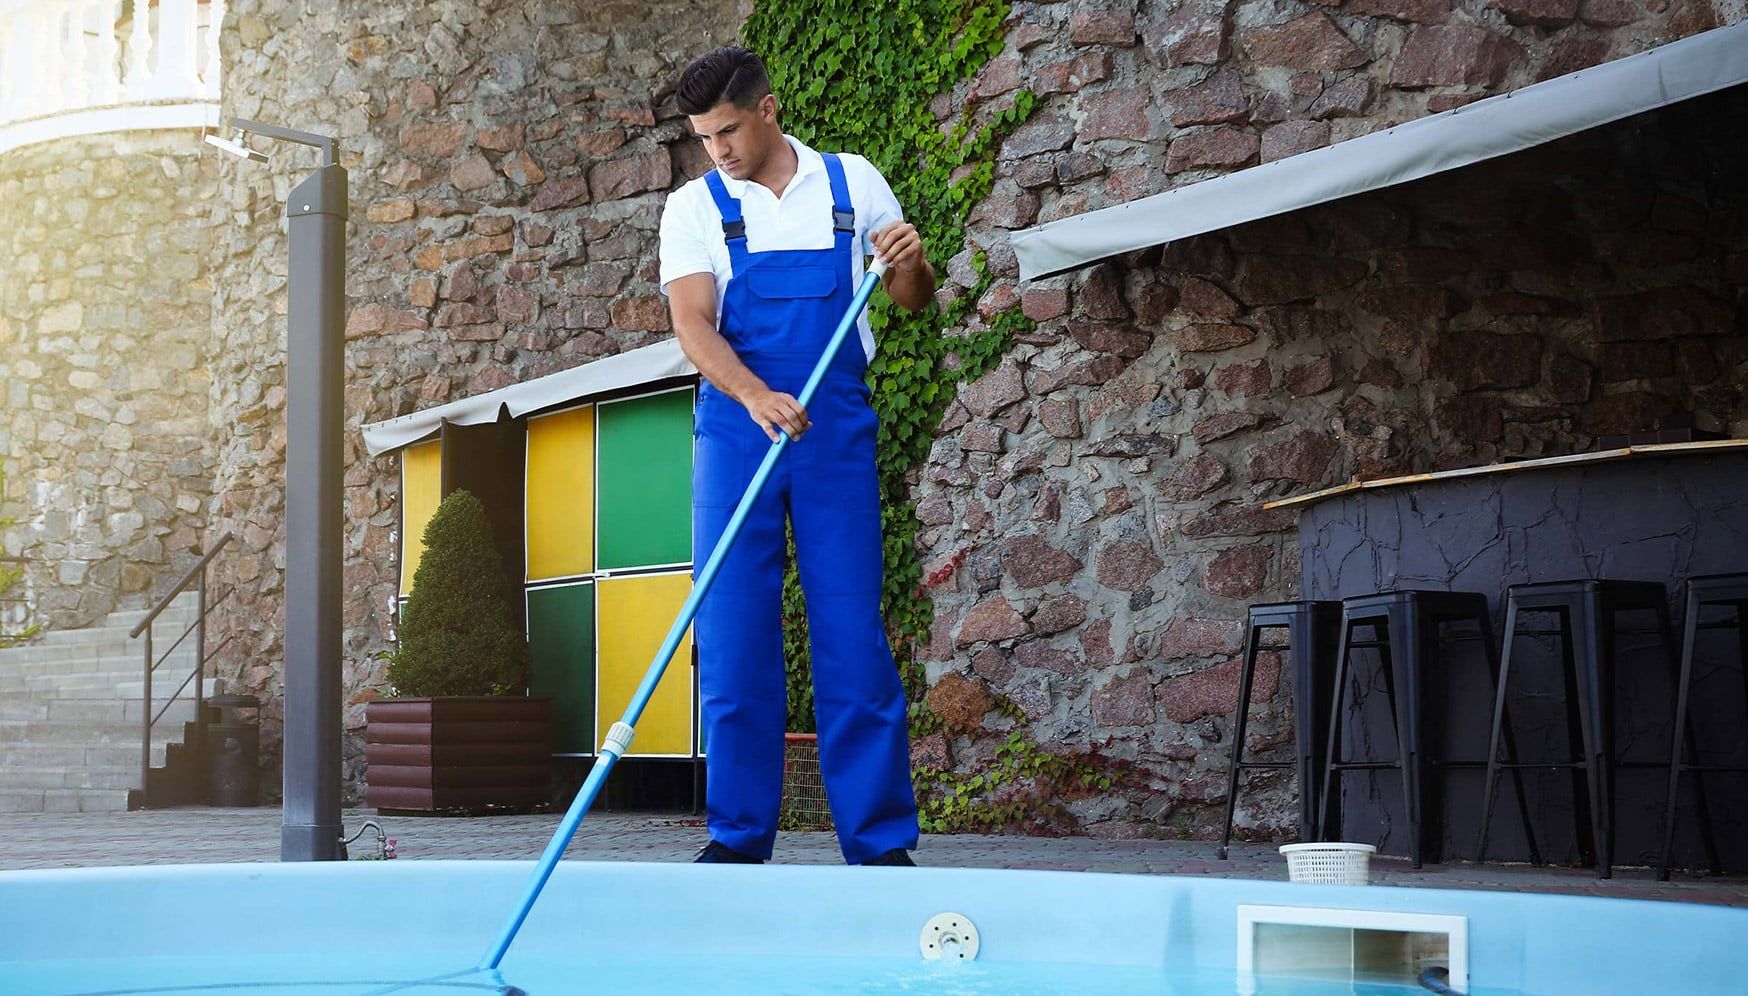 A man cleaning a pool